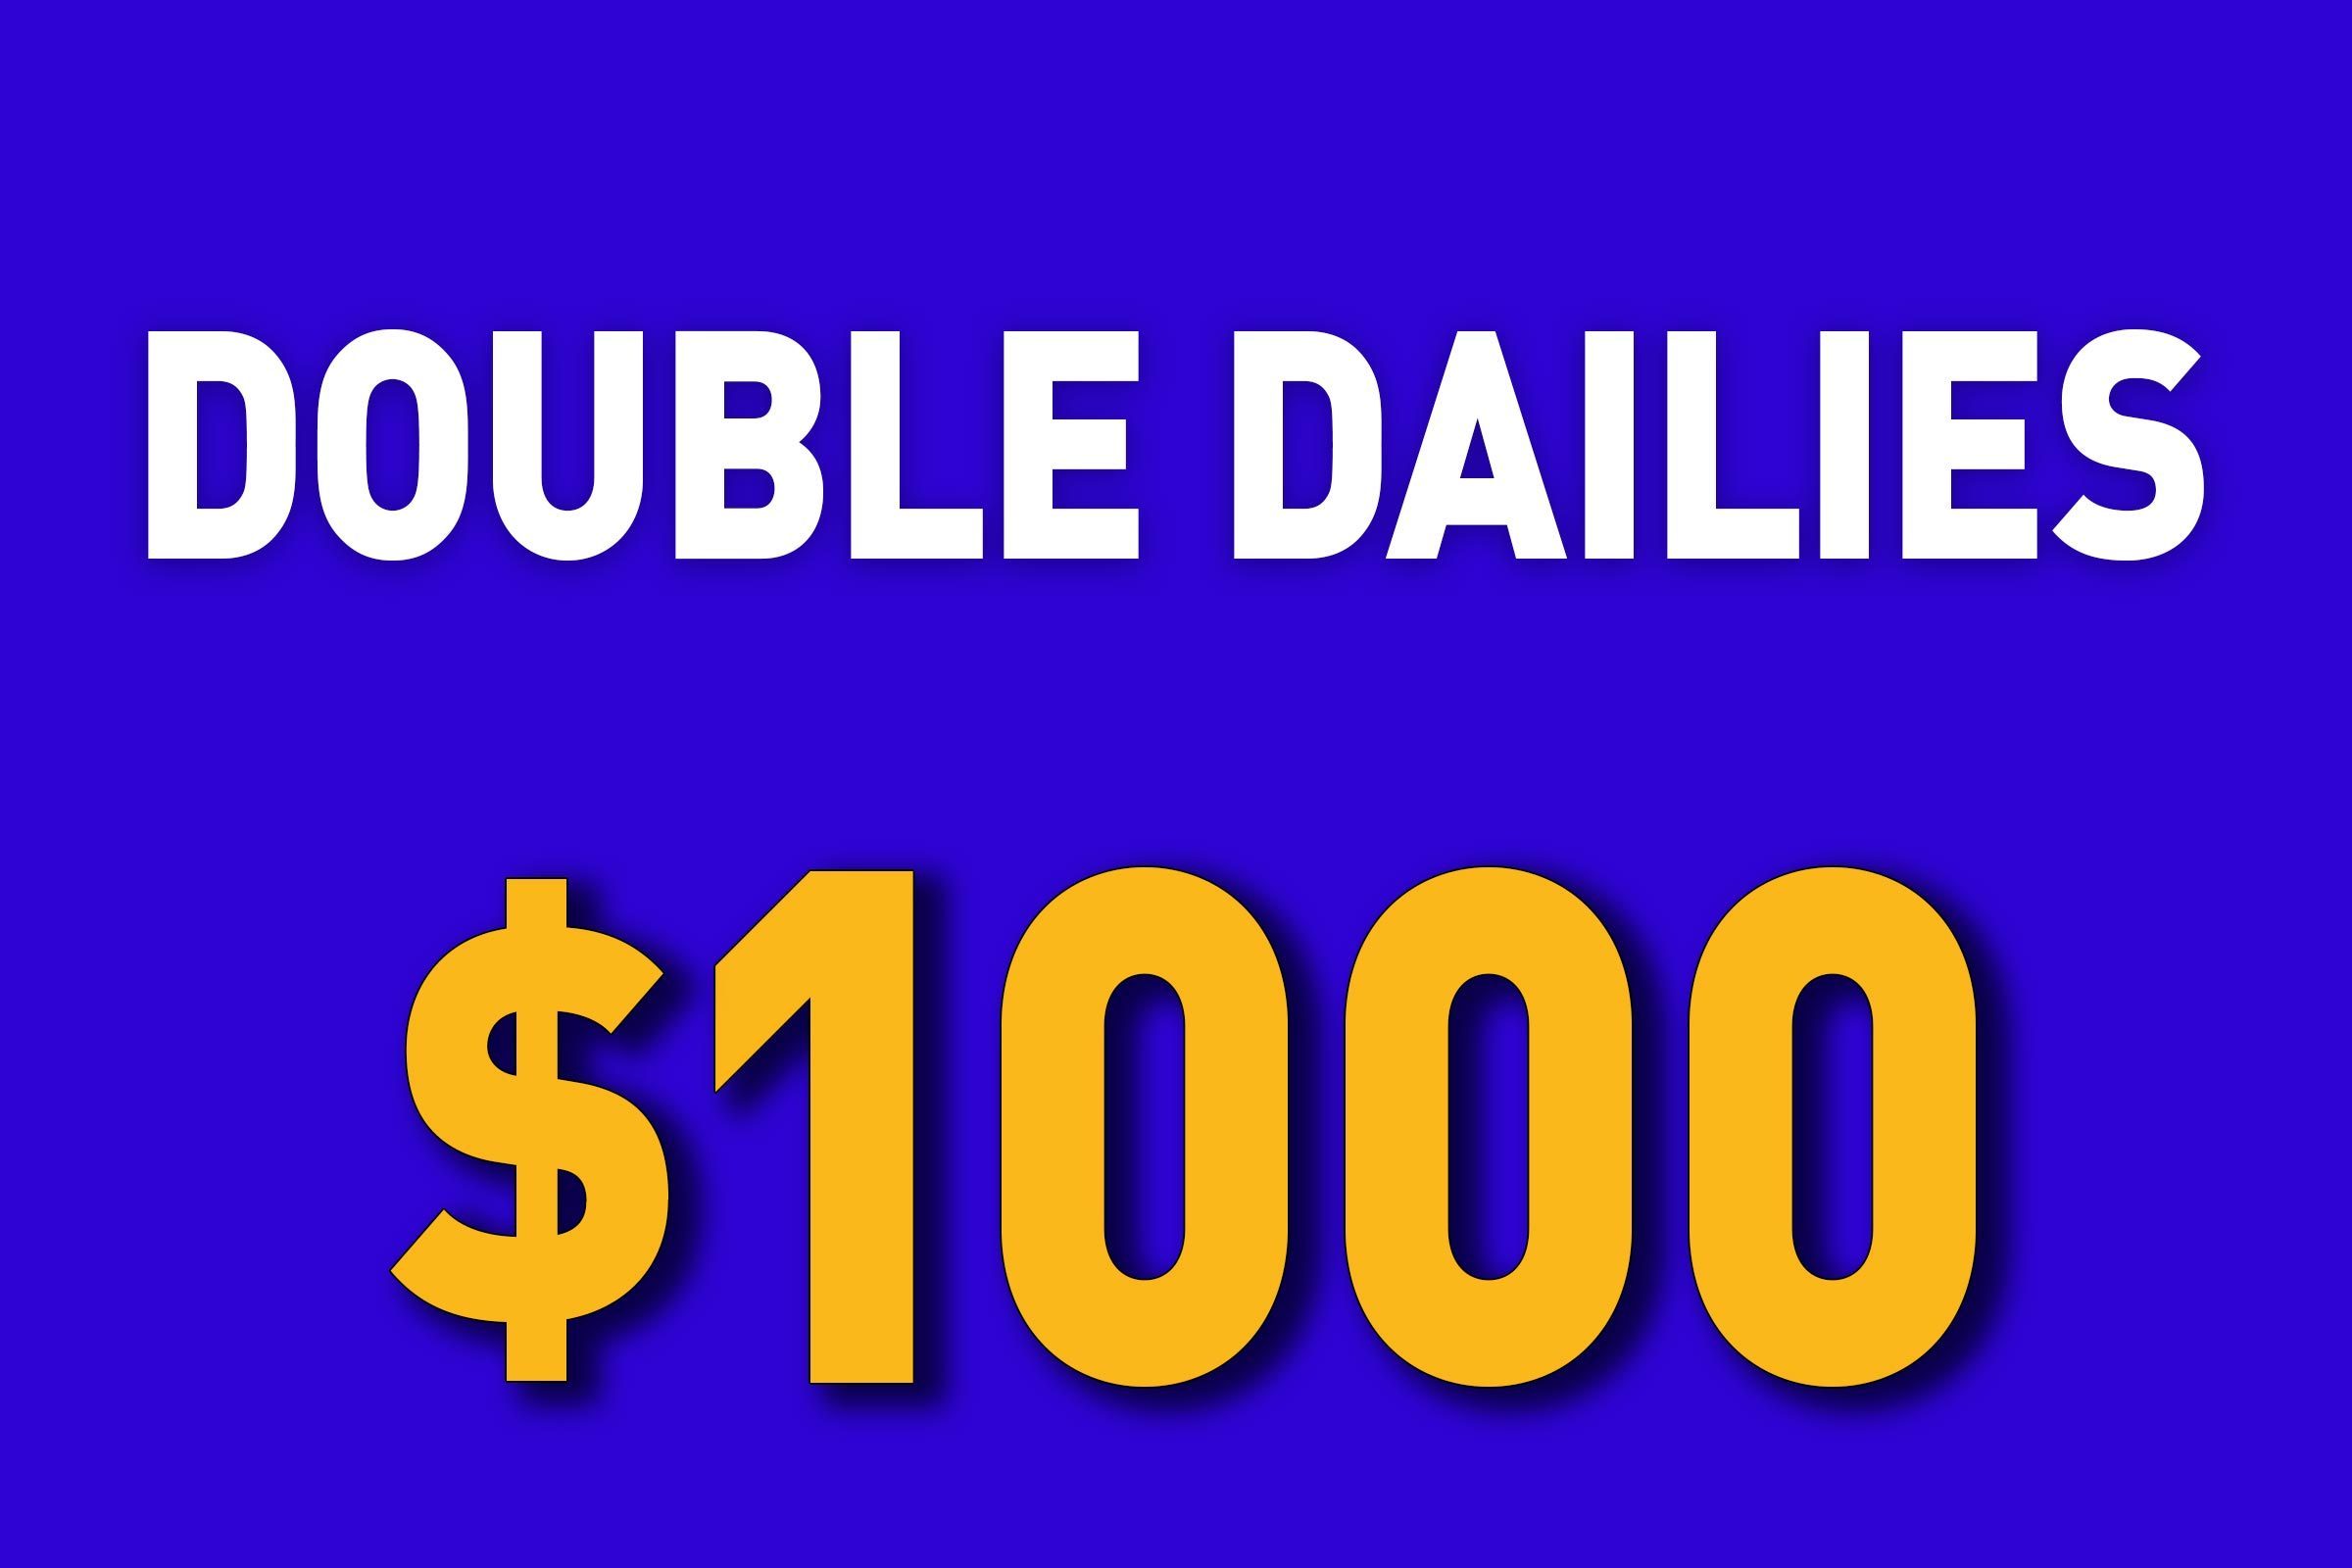 Double dailies for $1000